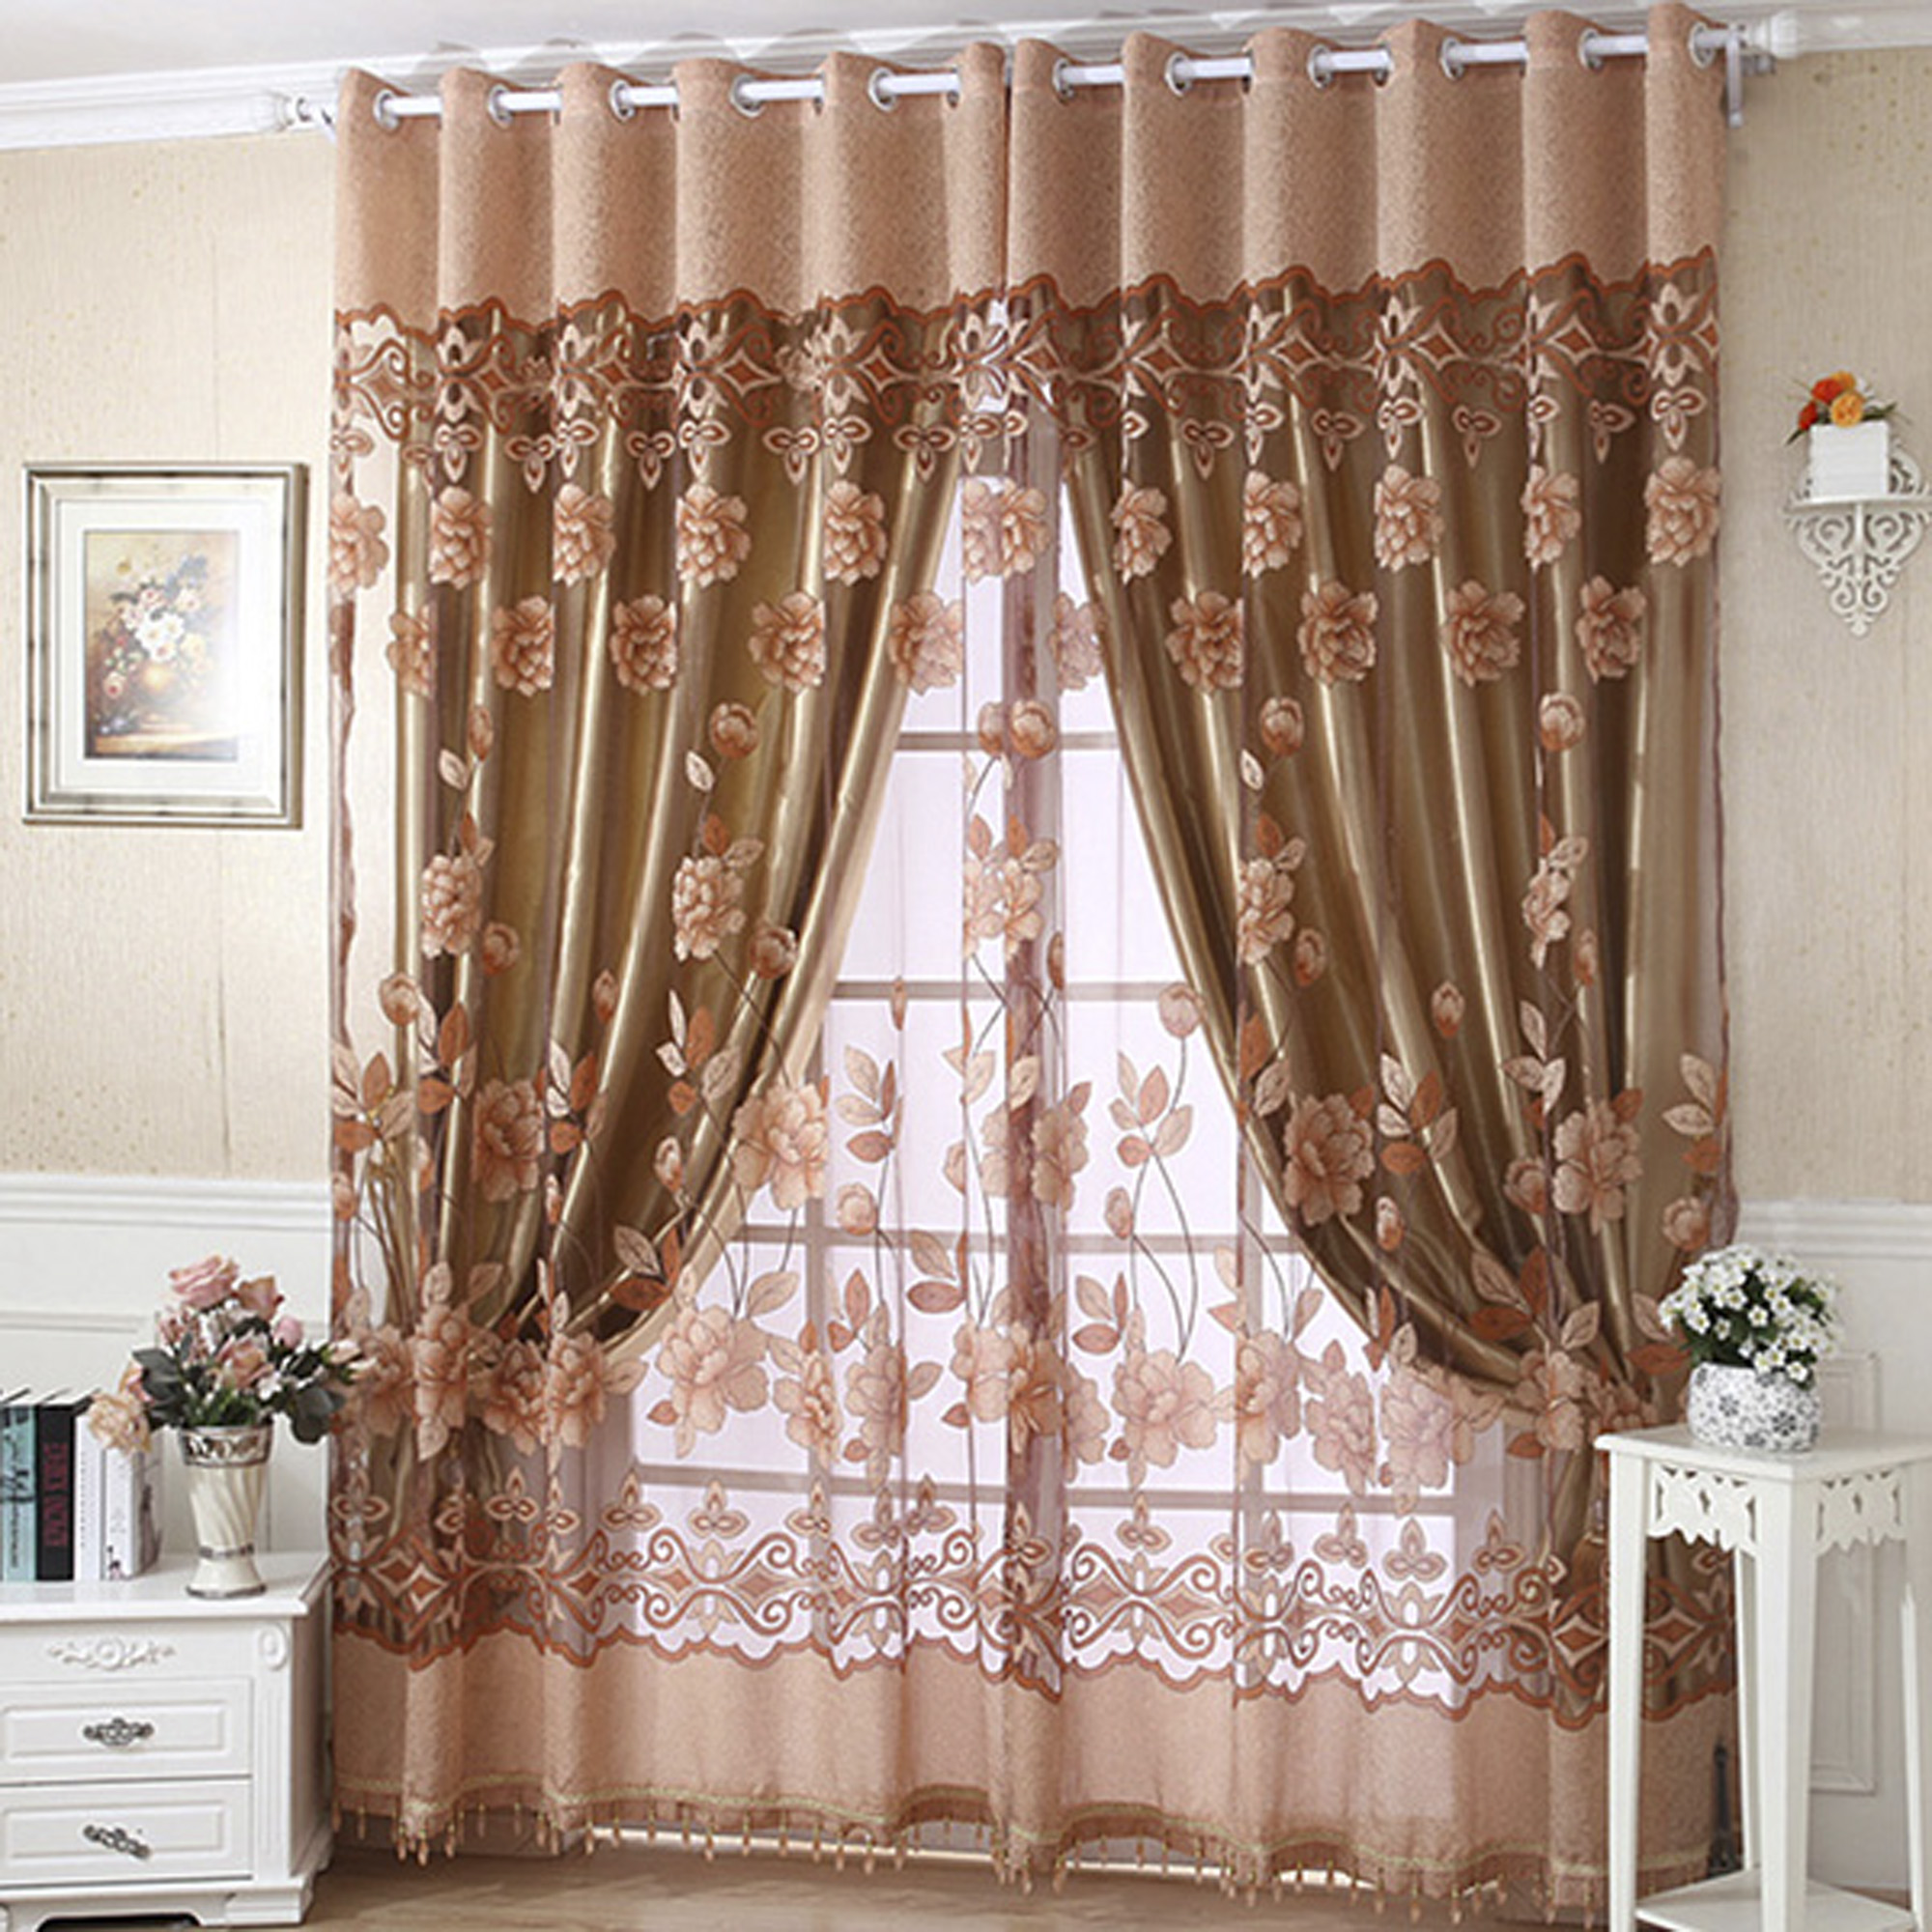 Floral Tulle Door Window Voile Curtain  Drape Panel Sheer Scarf Valances Divider